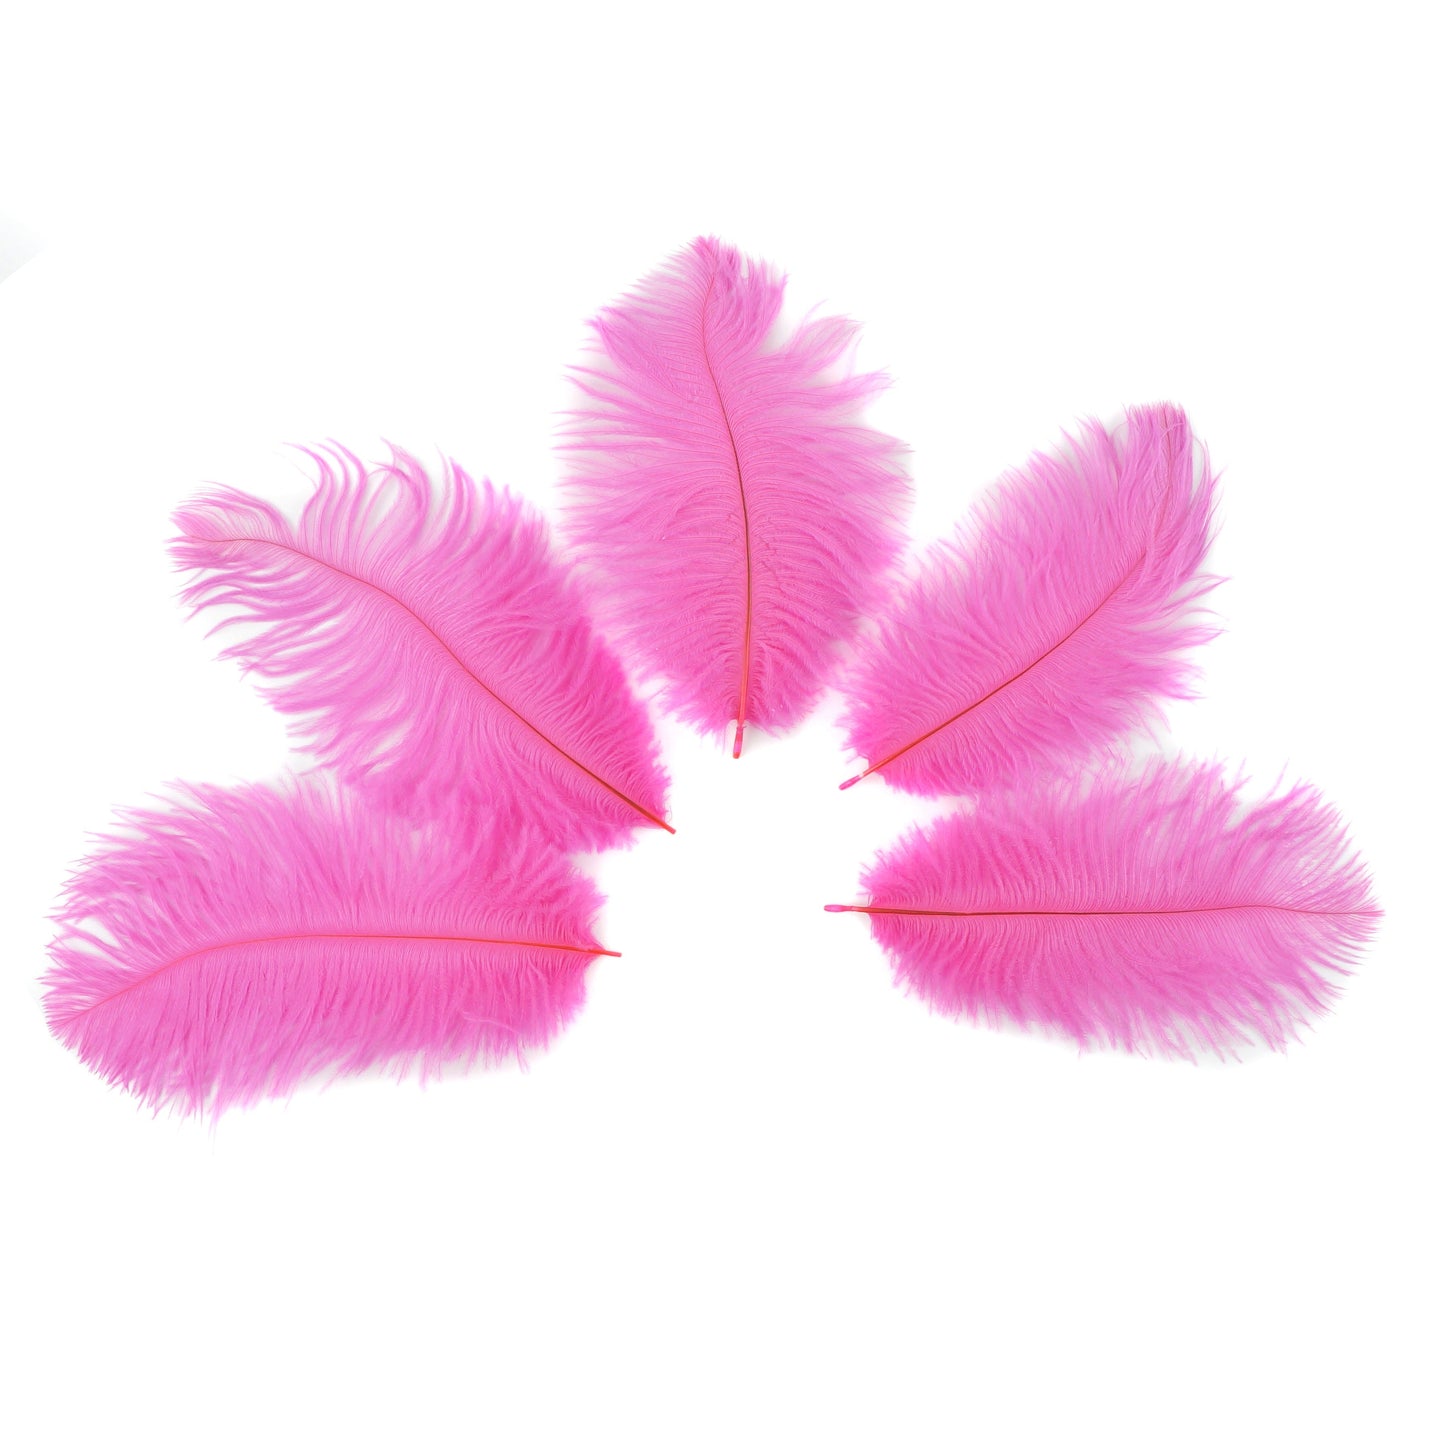 Ostrich Feathers 4-8" Drabs - Pink Orient